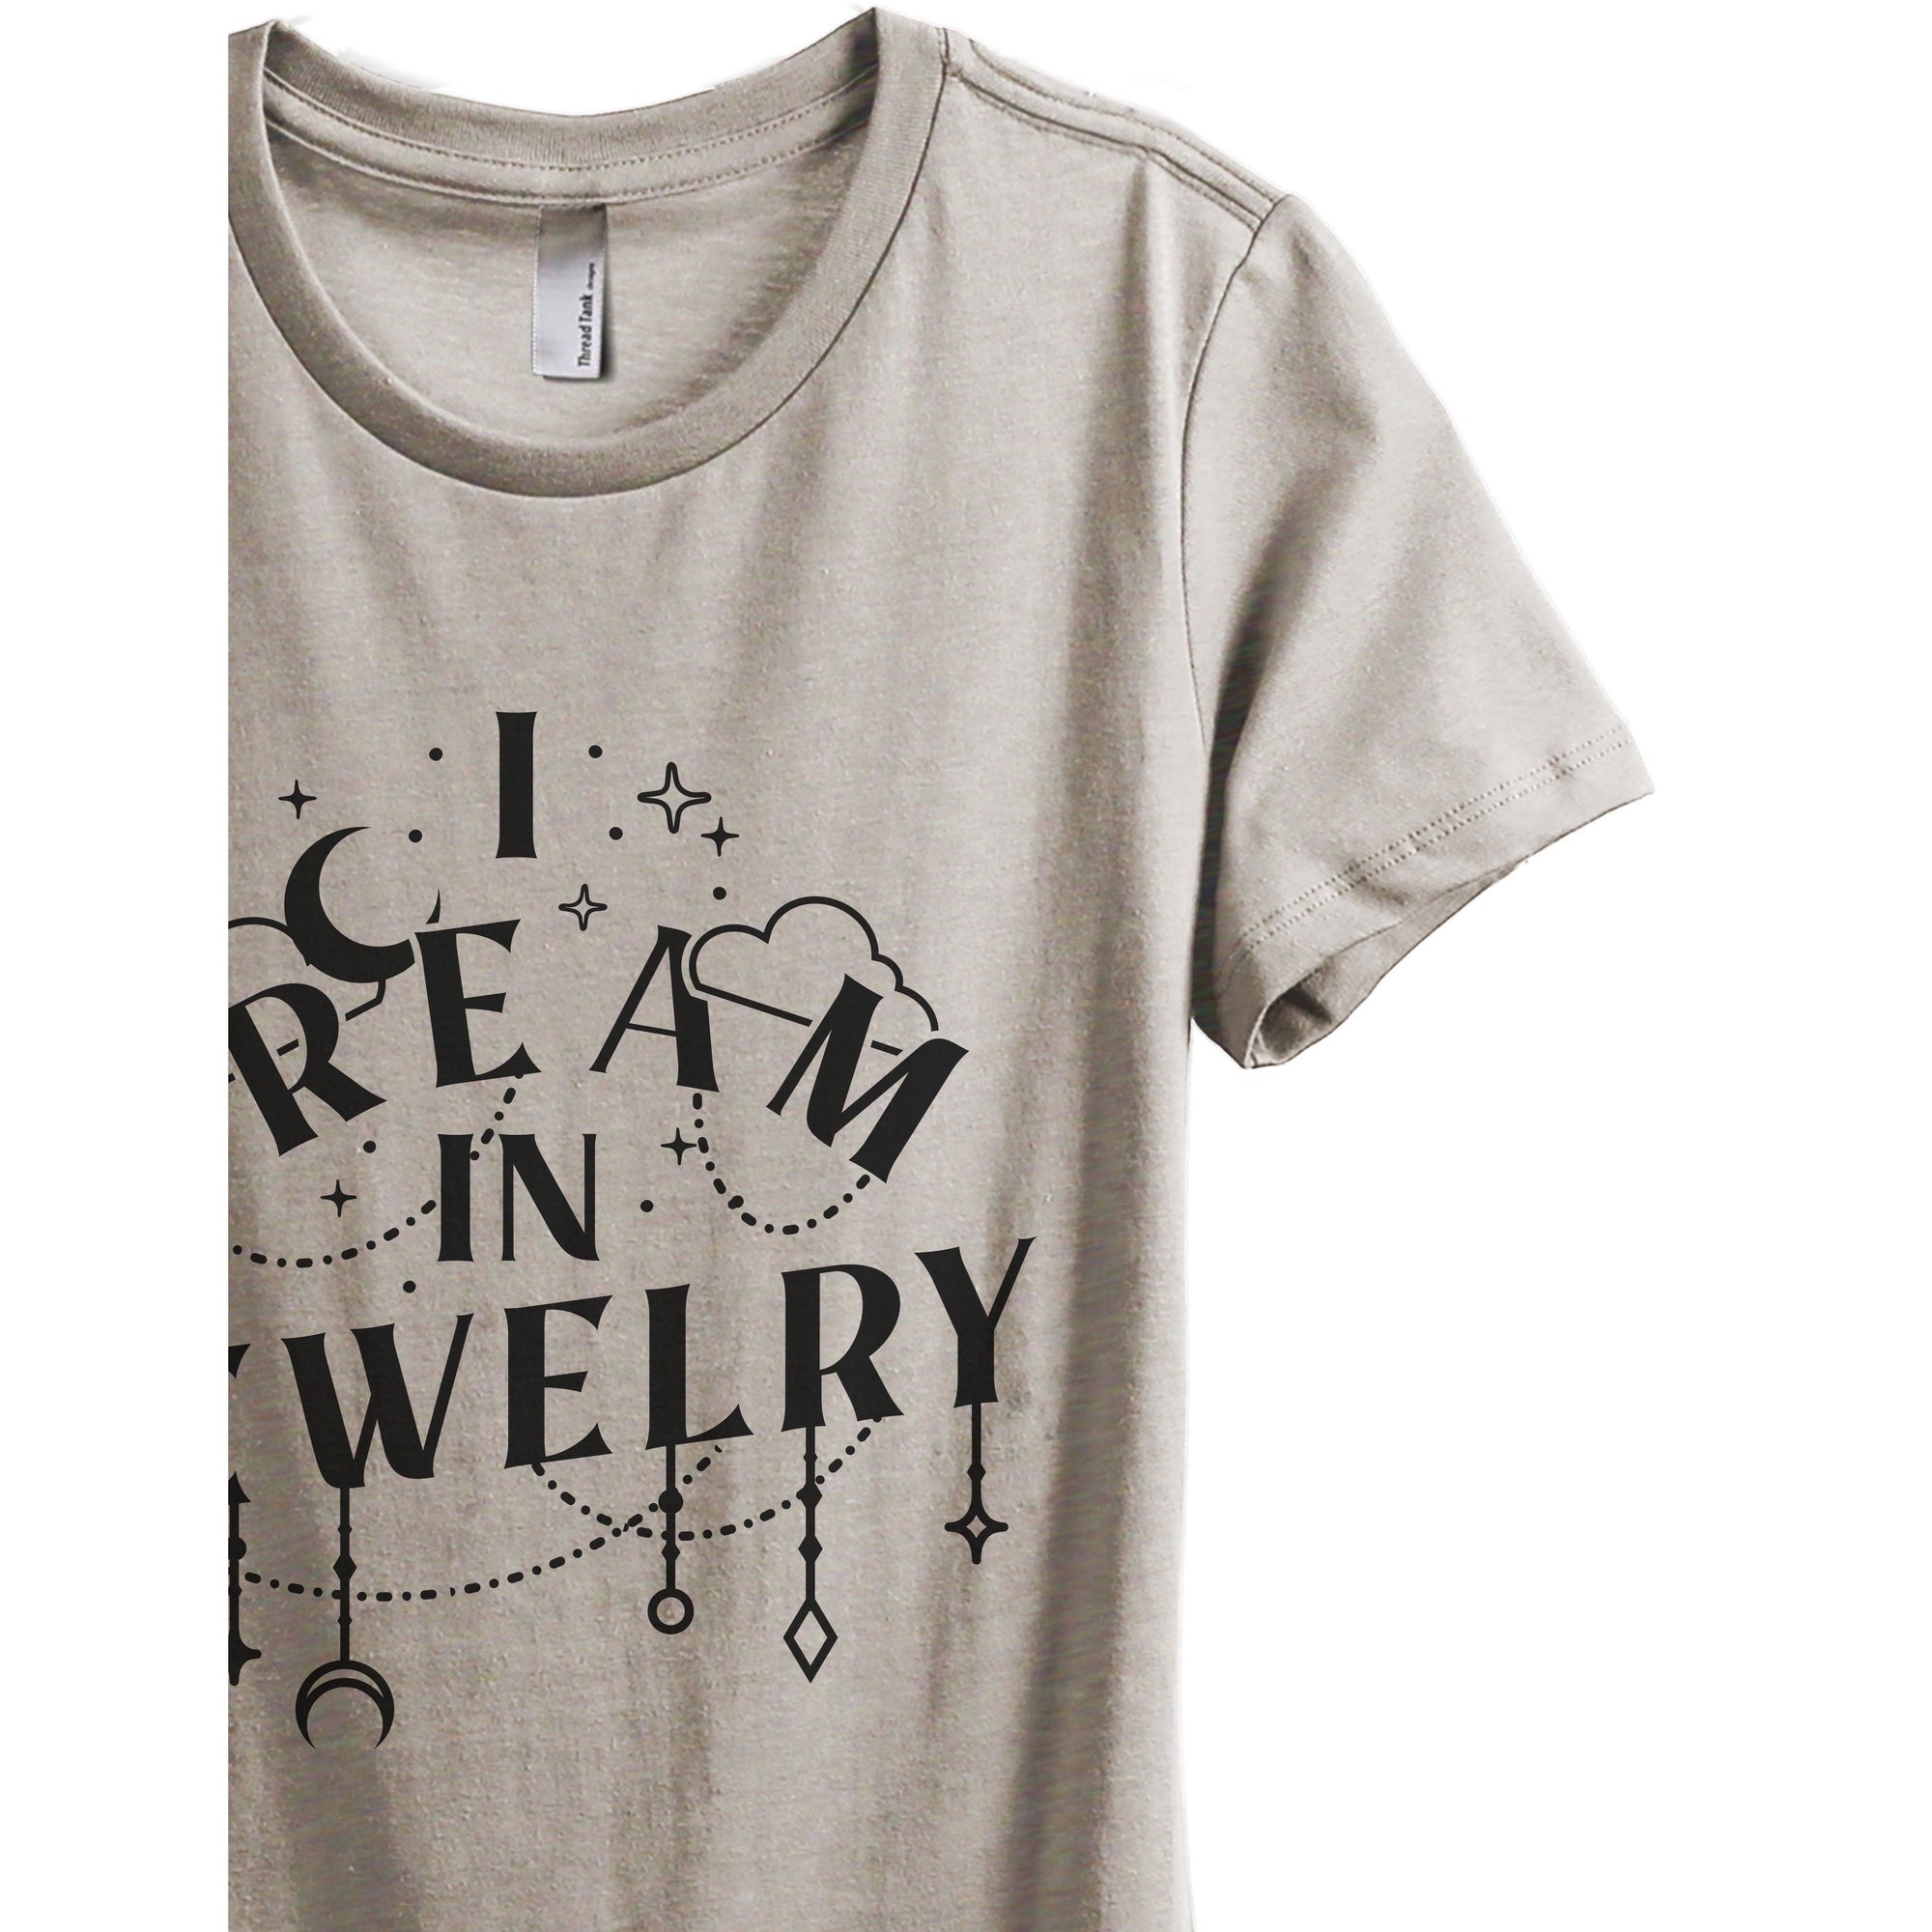 I Dream In Jewelry - Stories You Can Wear by Thread Tank